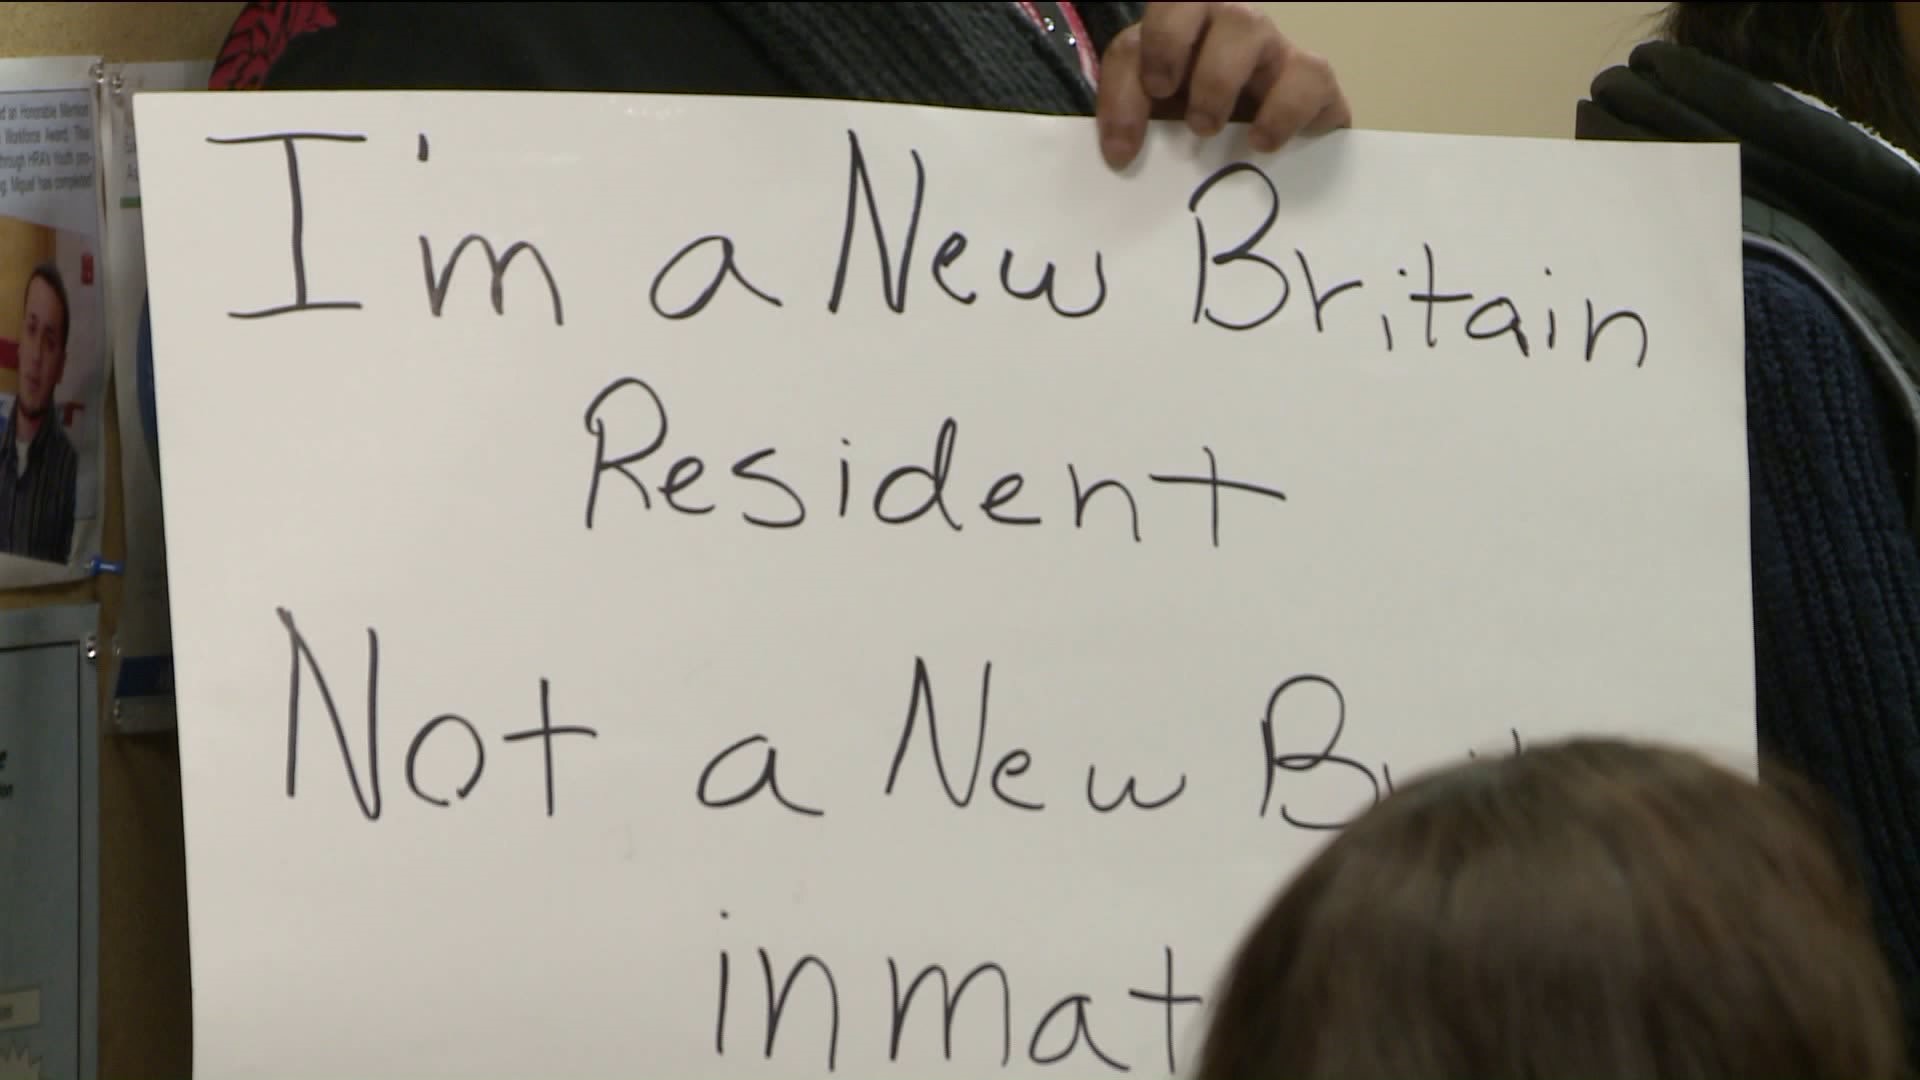 New Britain city officials walk through in response to former mayor`s comment